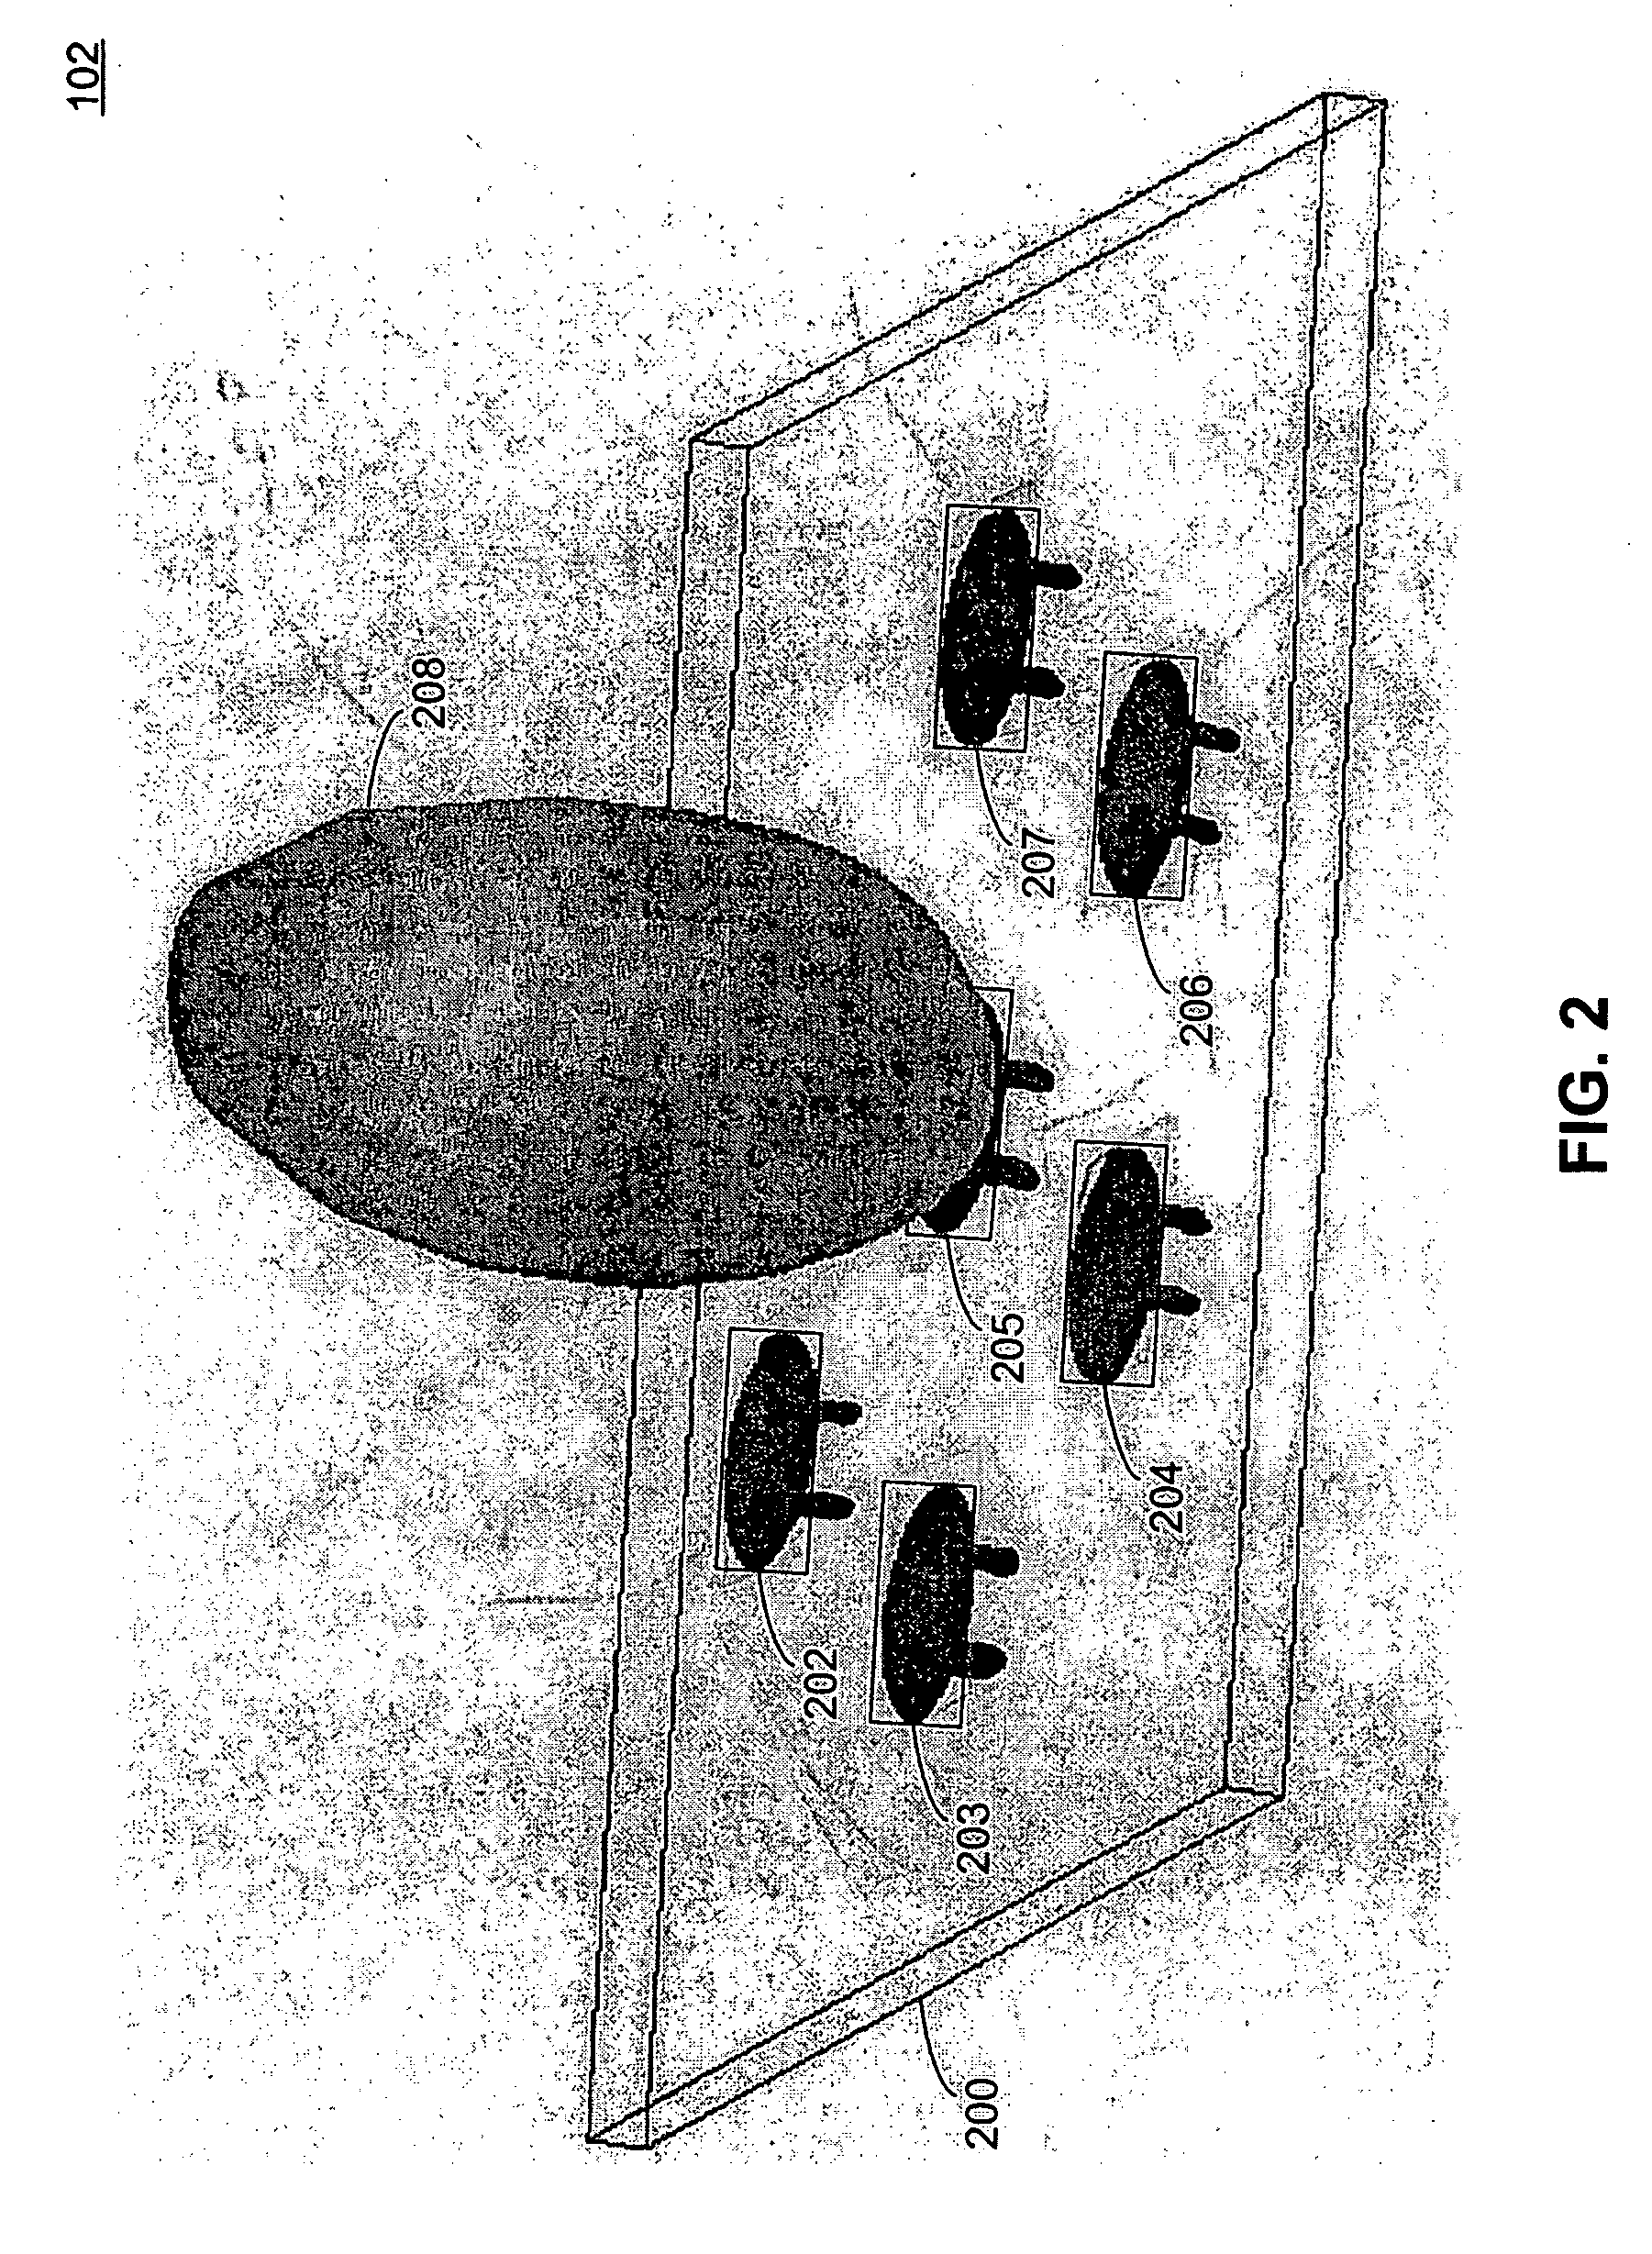 Method and system for a single-fed patch antenna having improved axial ratio performance